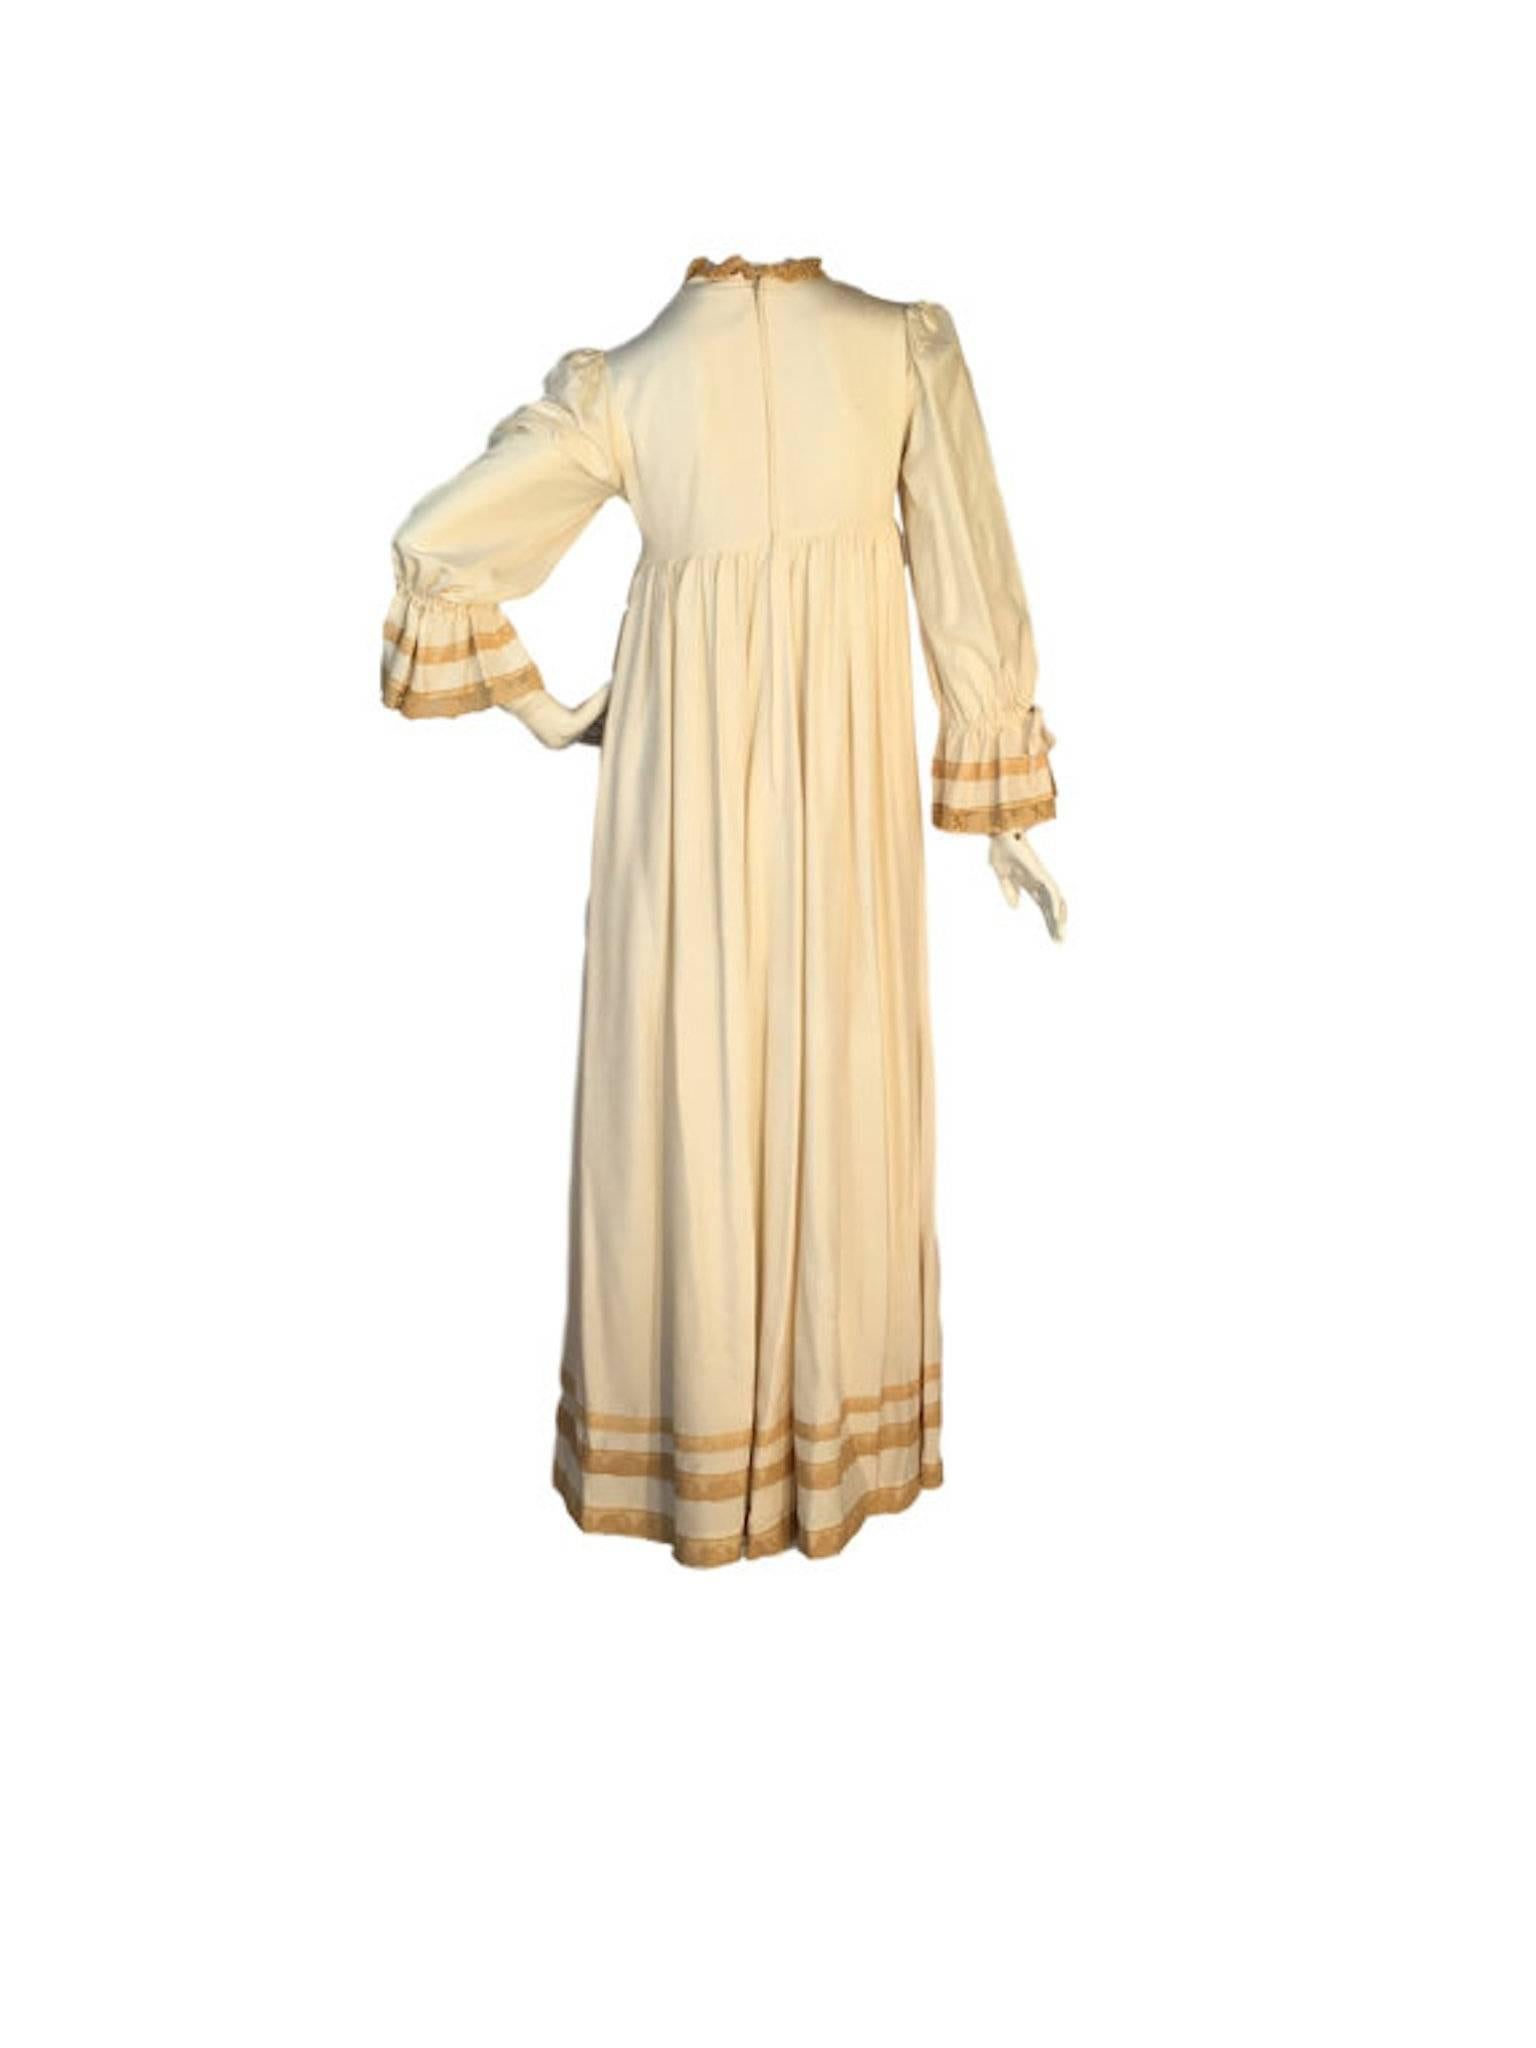 Gina Fratini 1970's 100% cream silk wedding / maxi dress. With empire bust and lace trim on collar and cuffs.

Size UK 8, measuring 17 inches across bust 14 inches across shoulders 56 inches length 

Very good condition, there is a very small mark